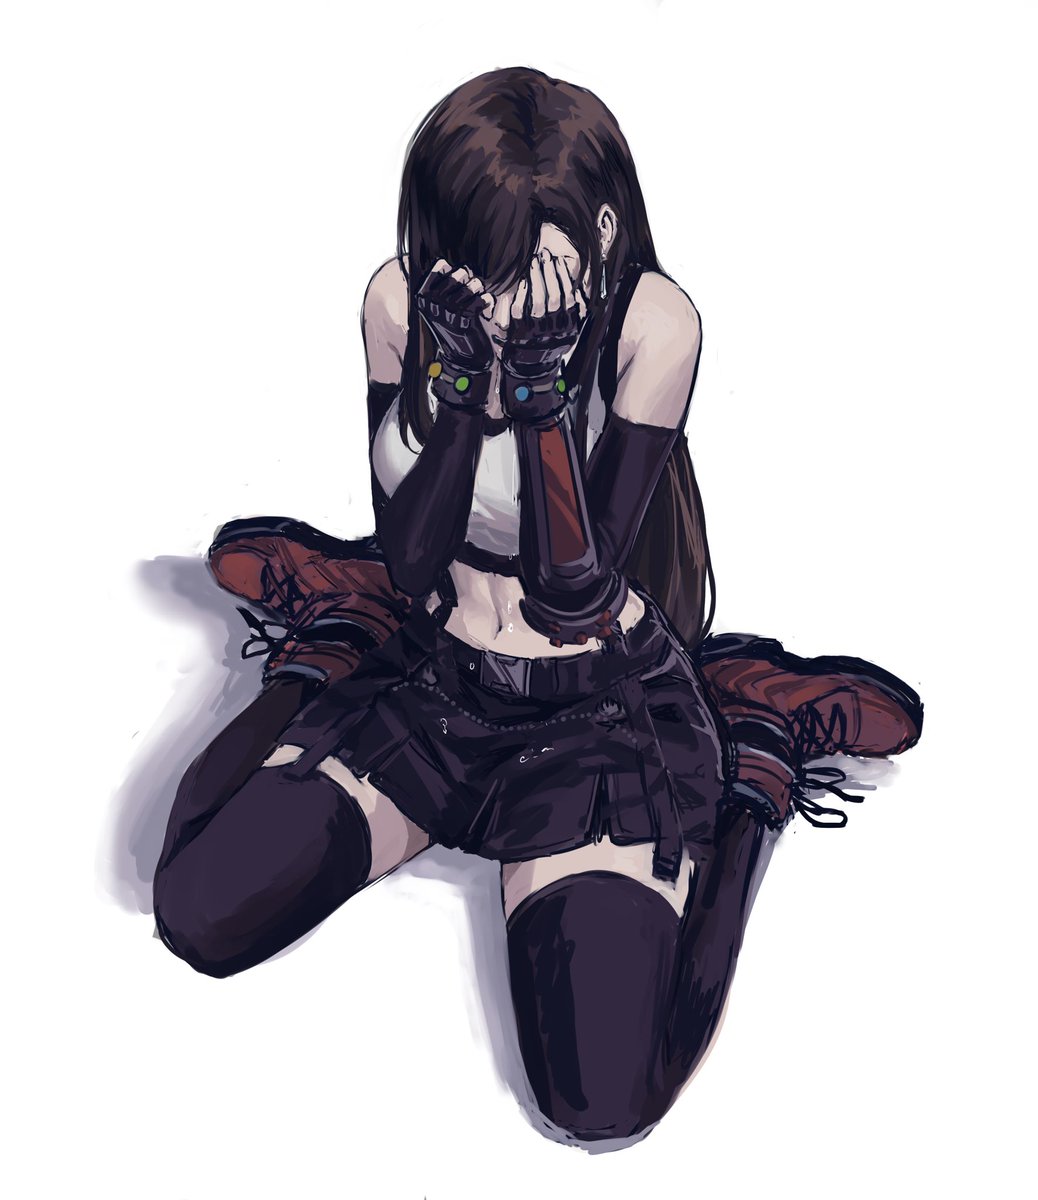 “i’m sick of all of this!” [#ff7rebirth]